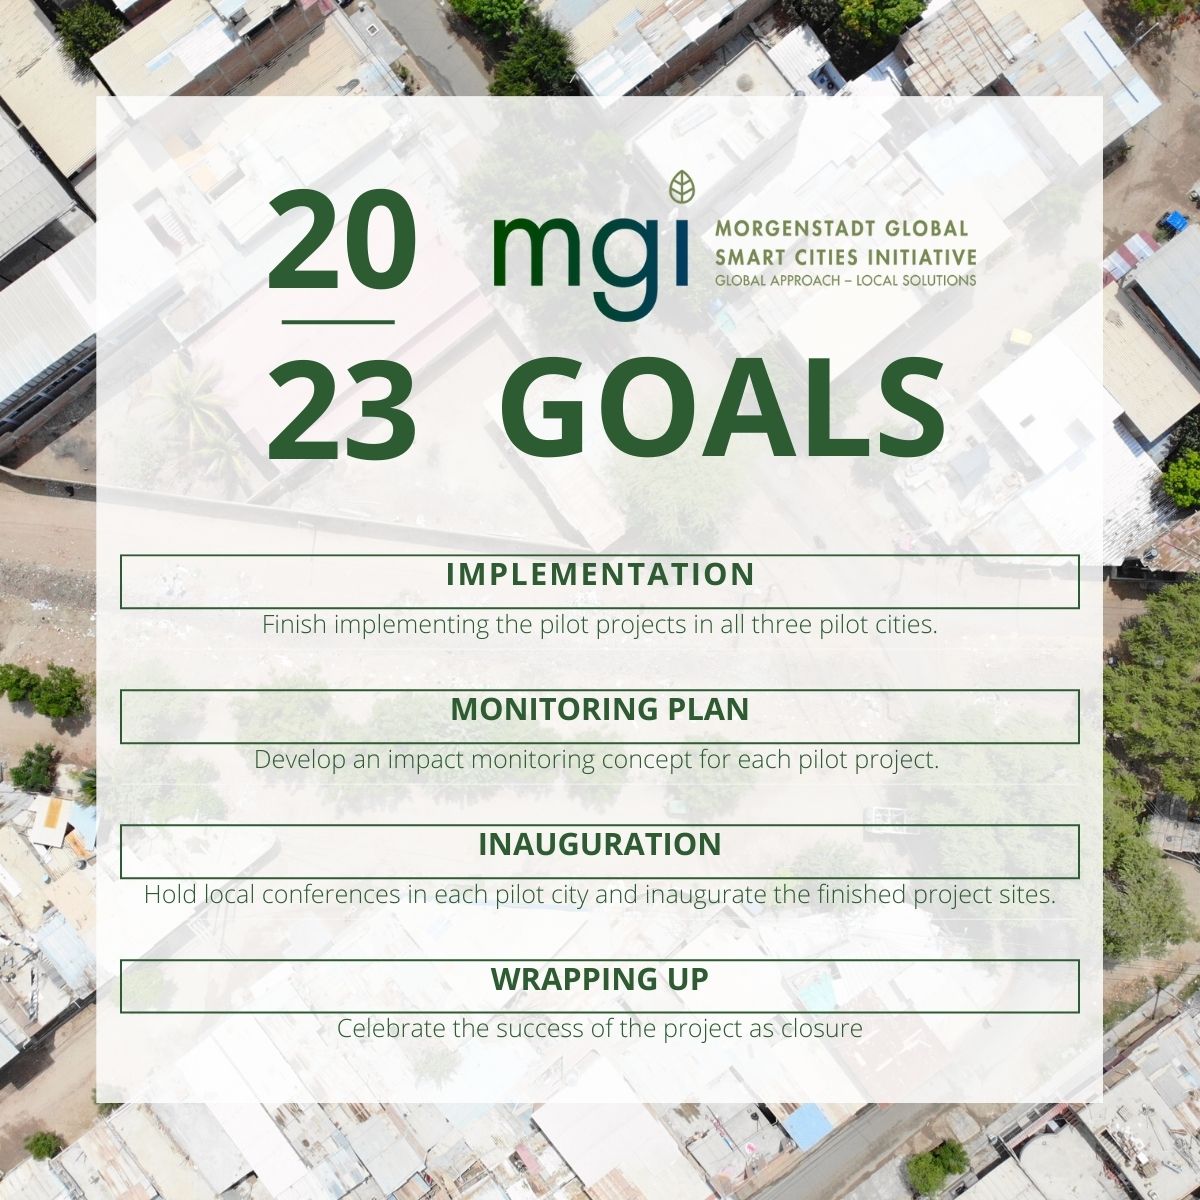 Text: MGI Goals 2023. Implementation. Finish implementing all three pilot projects. Monitoring plan. Develop an impact monitoring concepts for each pilot project. Inauguration. Celebrate the successfull implementation at